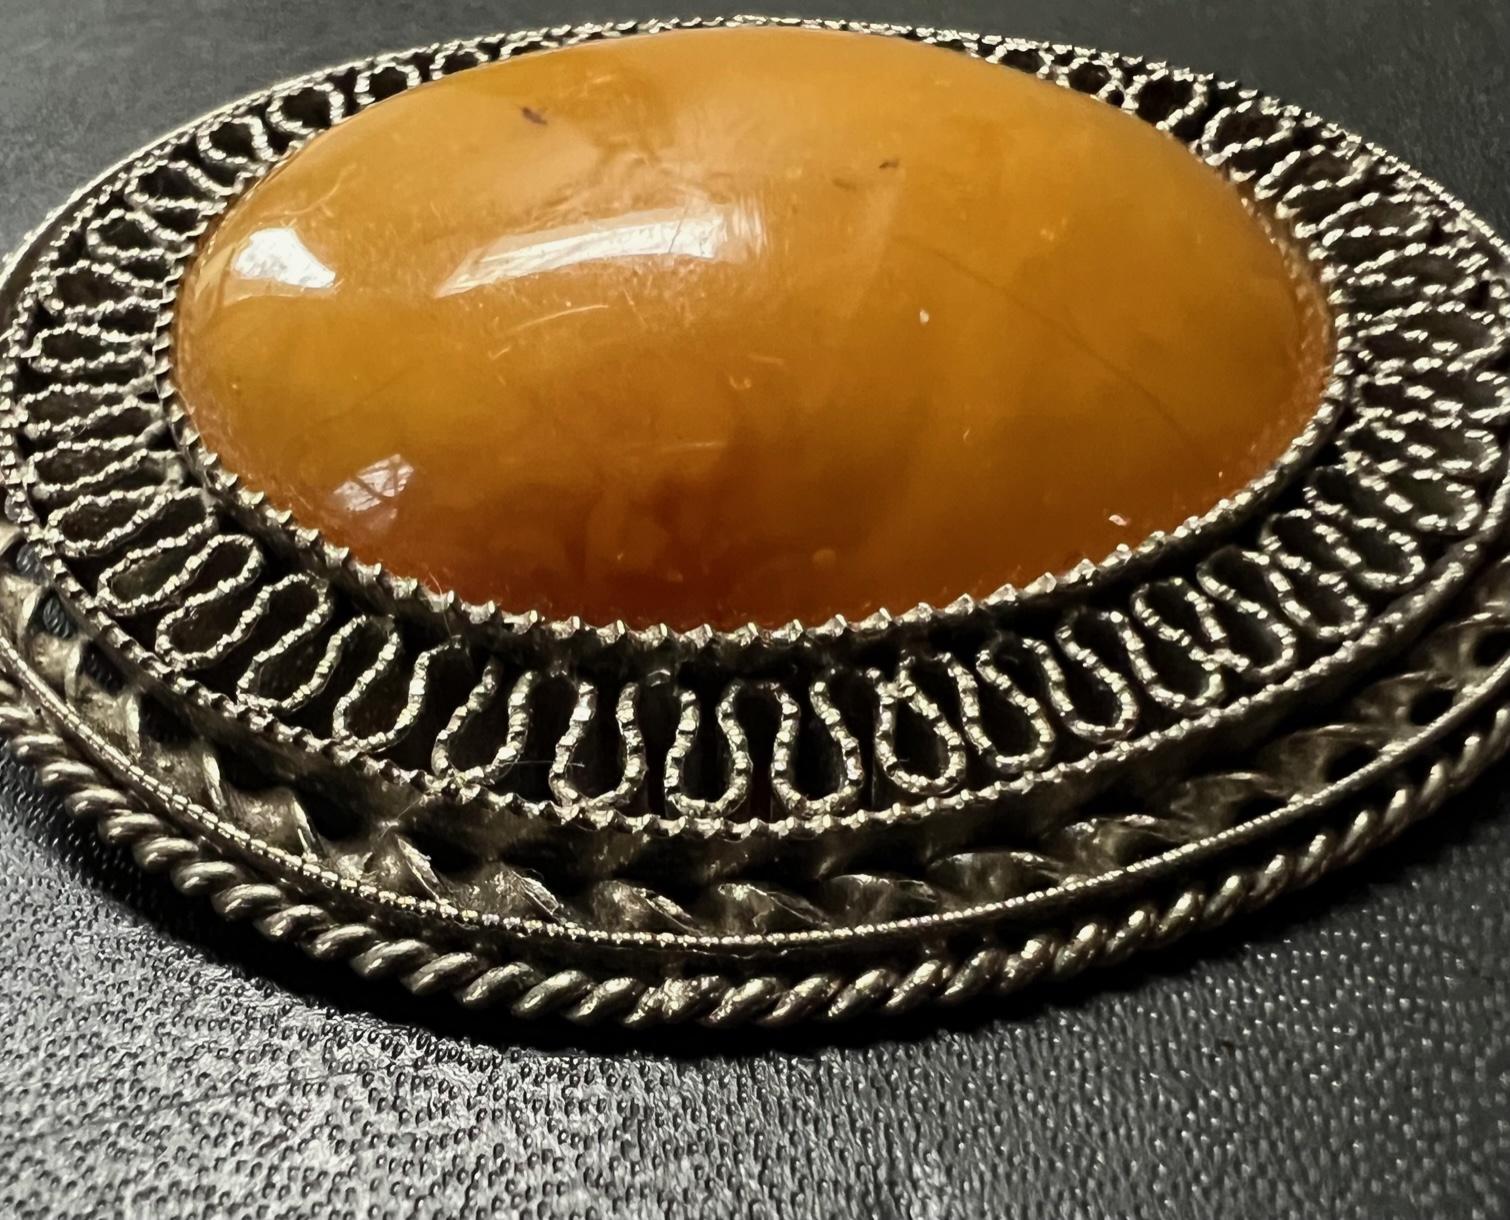 Rare solid amber brooch handcrafted in Latvia.  This unique ring was a part of my late grandmothers robust collection of amber jewelry.  She brought the pieces over on a boat while escaping Russian occupation in Latvia after World War 2.  This early